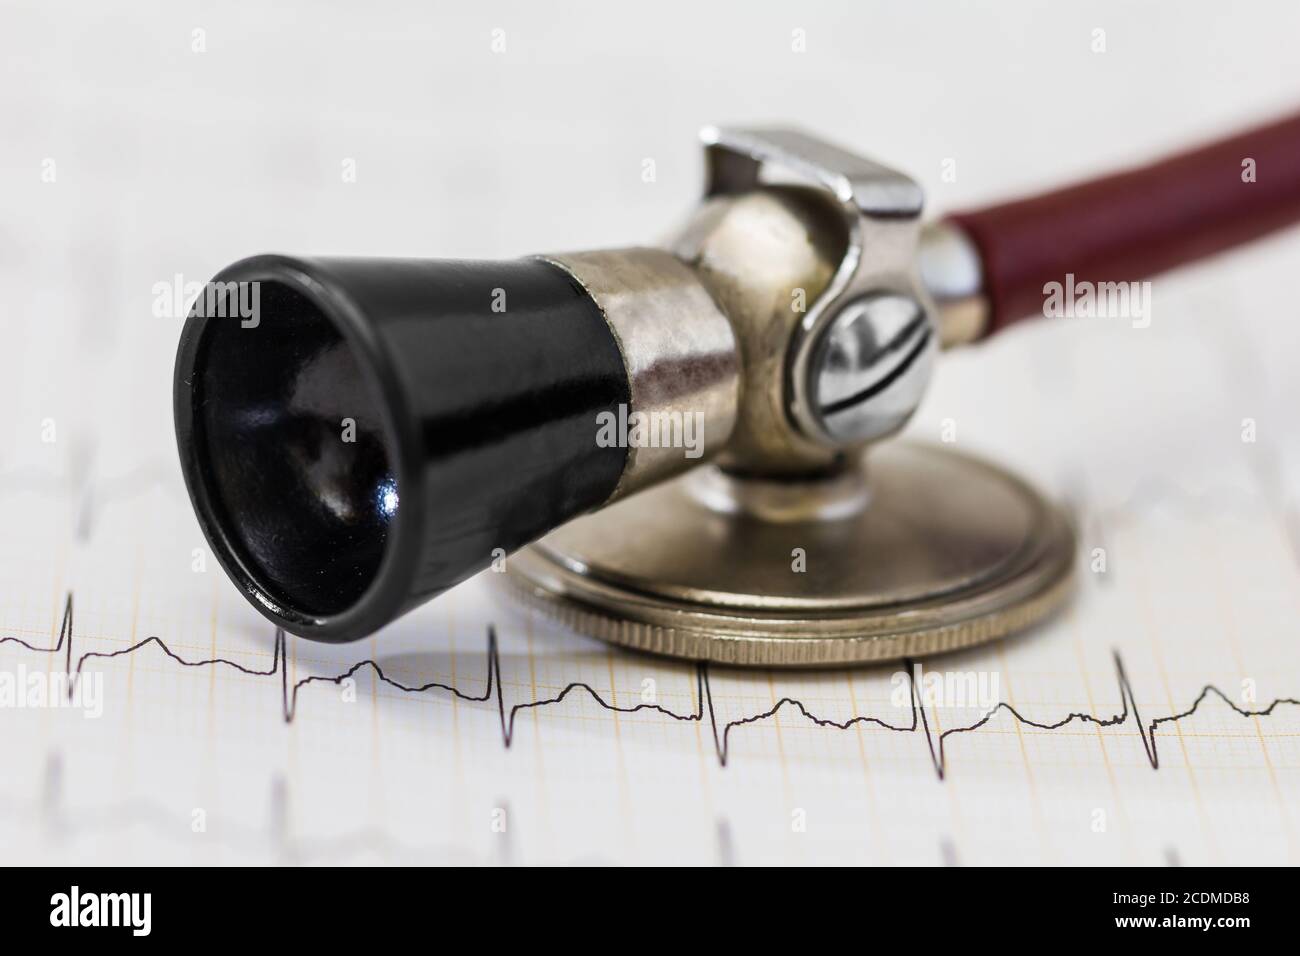 Cardiogram pulse trace and stethoscope concept for cardiovascular medical exam Stock Photo